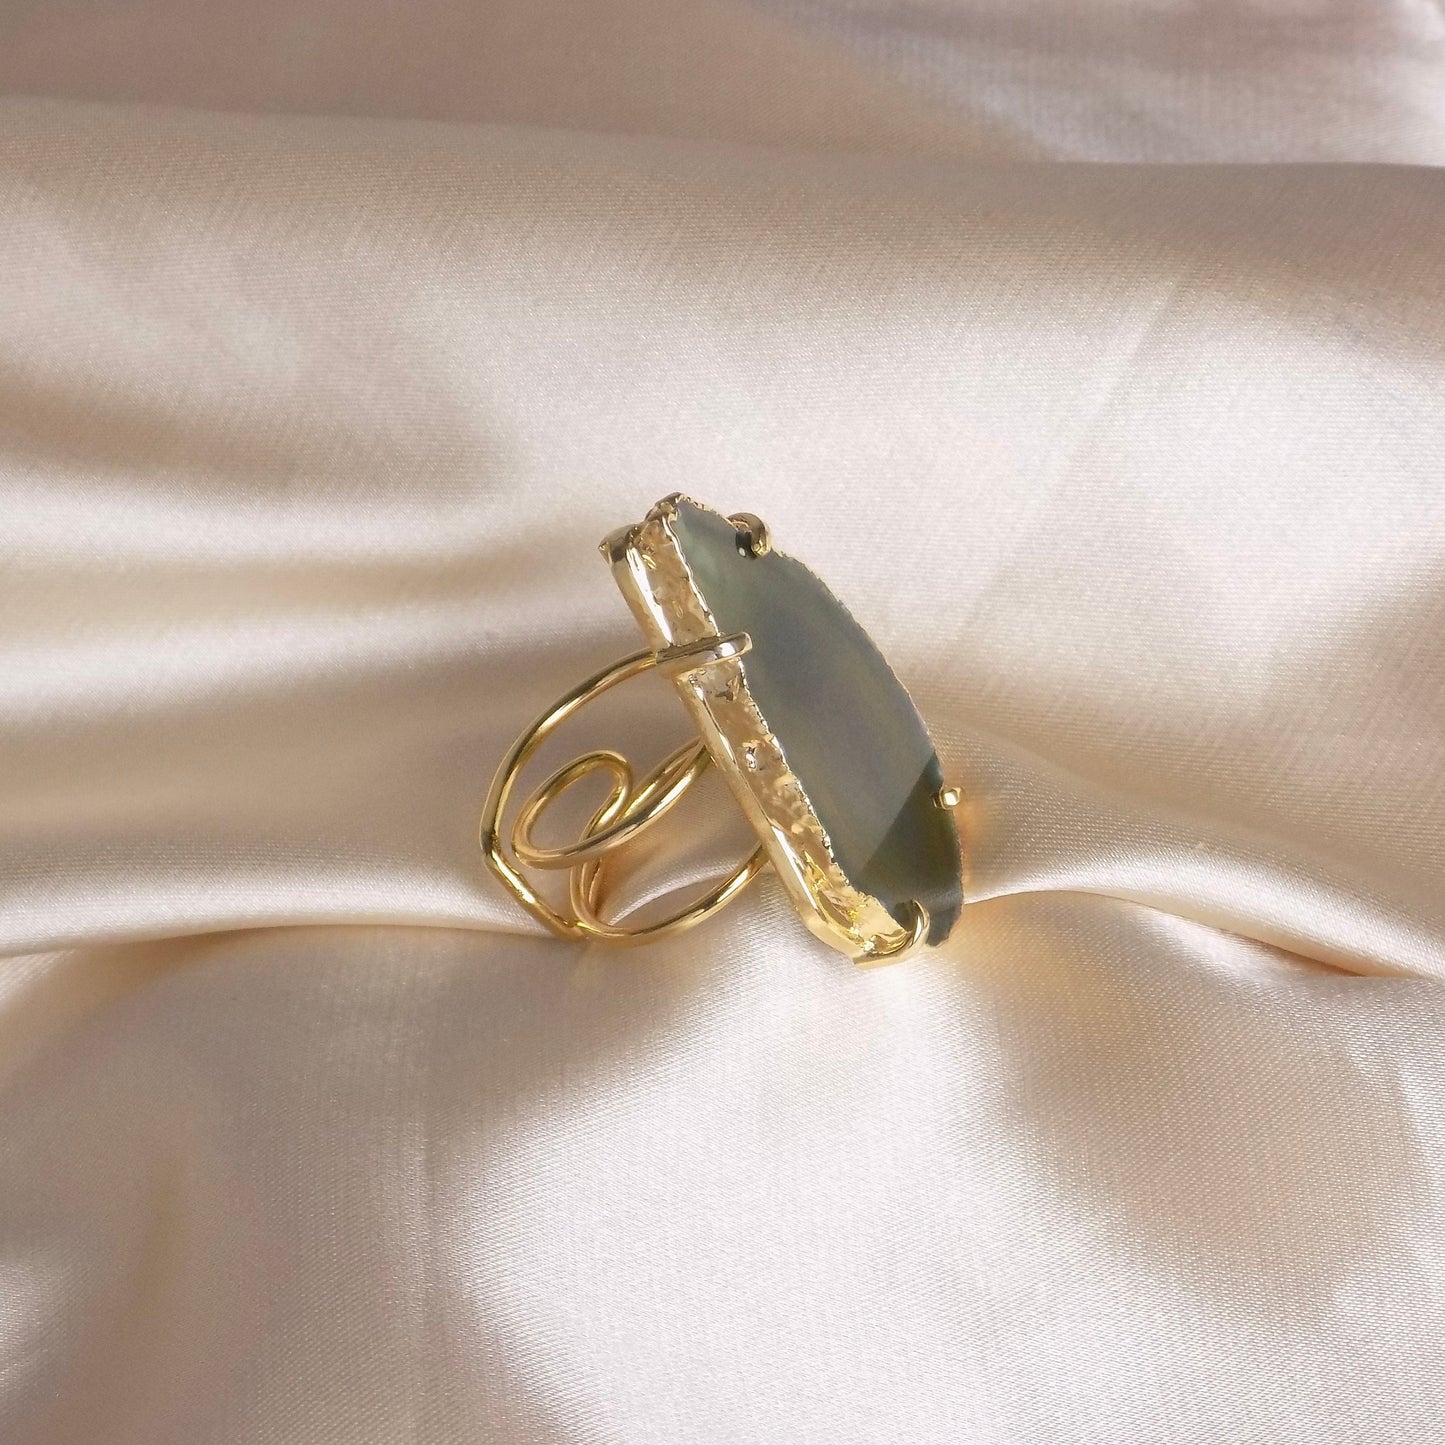 Boho Large Crystal Ring For Women, Green Agate Statement Ring Gold Plated Adjustable, G15-143